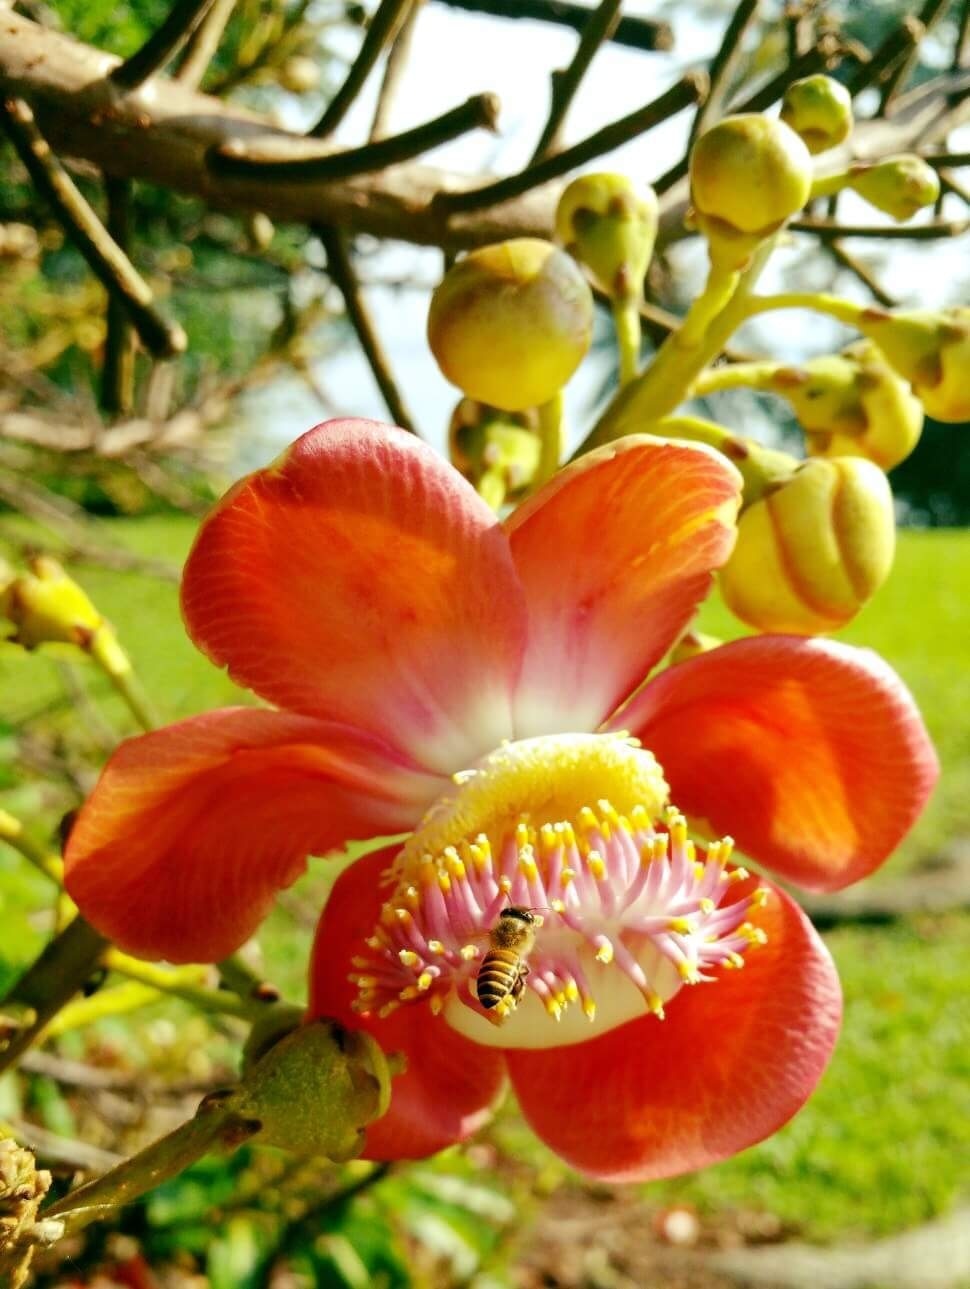 Near the beautiful Beaulieu House that was built in 1910s, are Cannonball Trees! #LoveMyTown

Its distinctive flowers burst forth among fruits that are round and woody, resembling cannonballs! 

